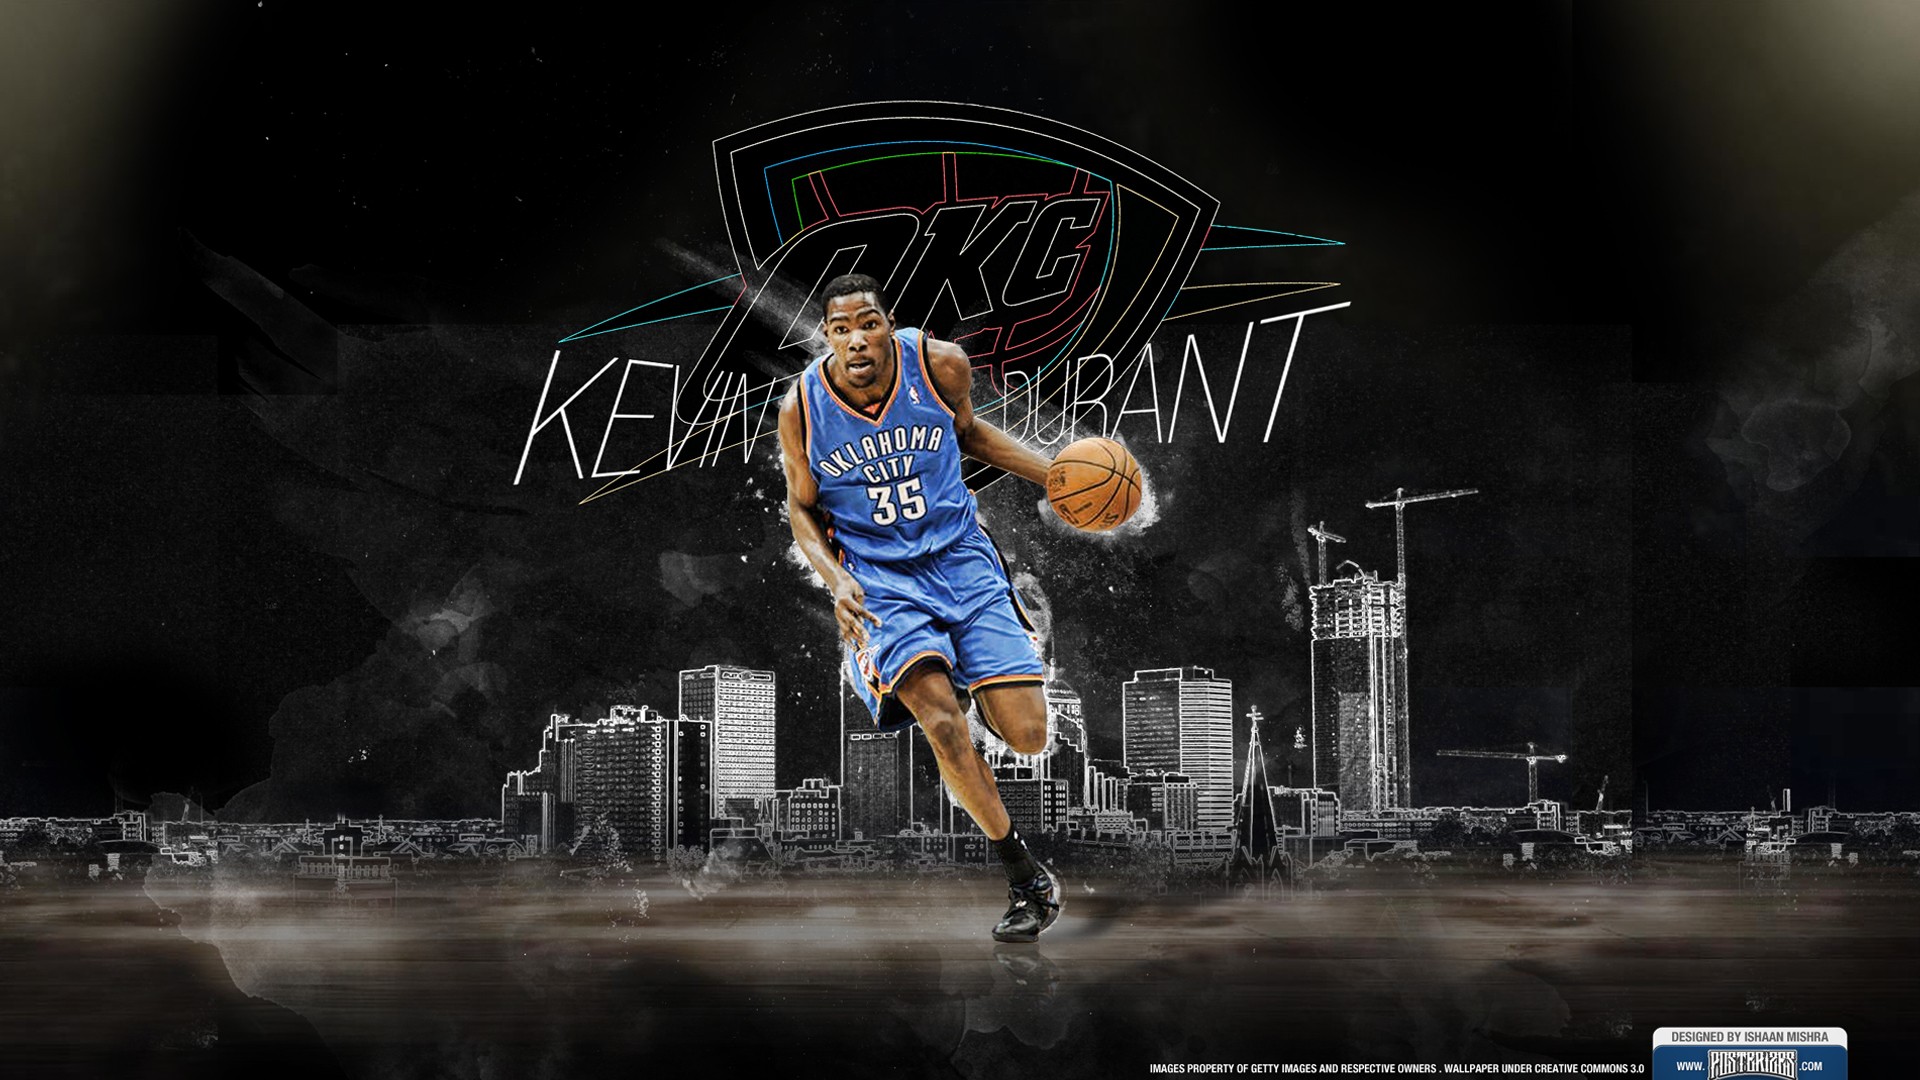 Wallpapers Kevin Durant Logo Full Hd 1920x1080 #kevin